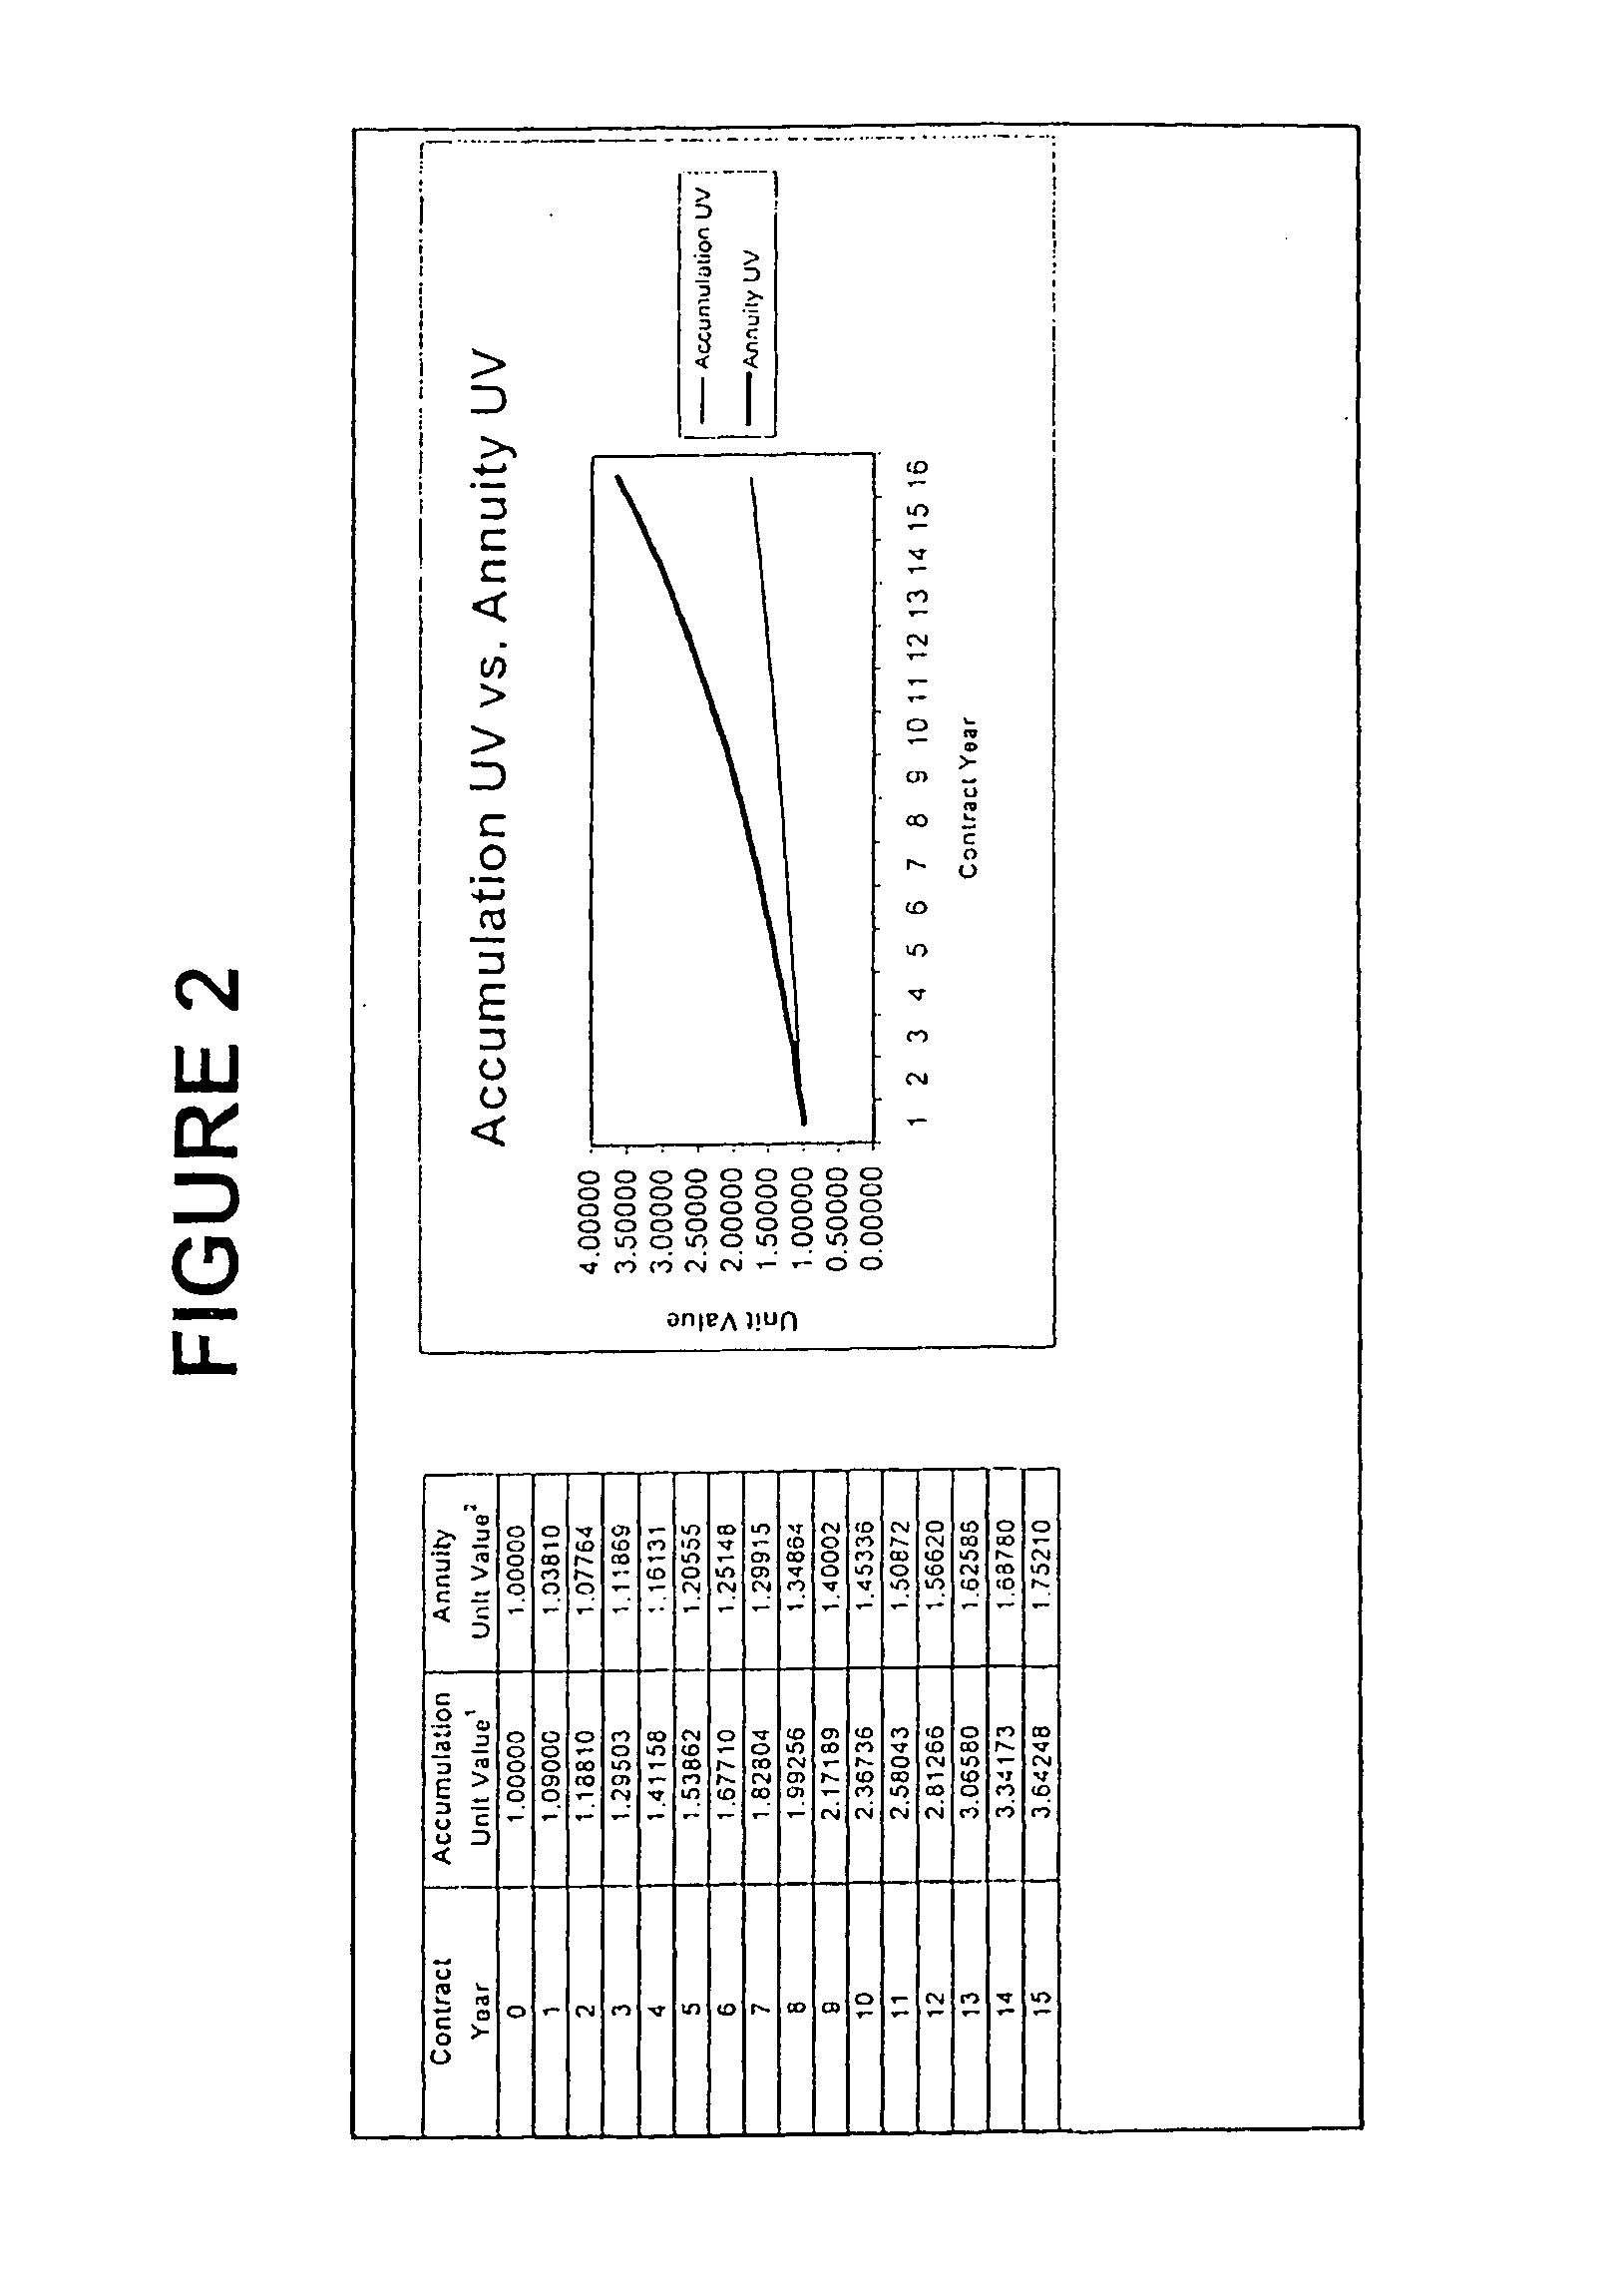 Method and system for providing retirement income benefits